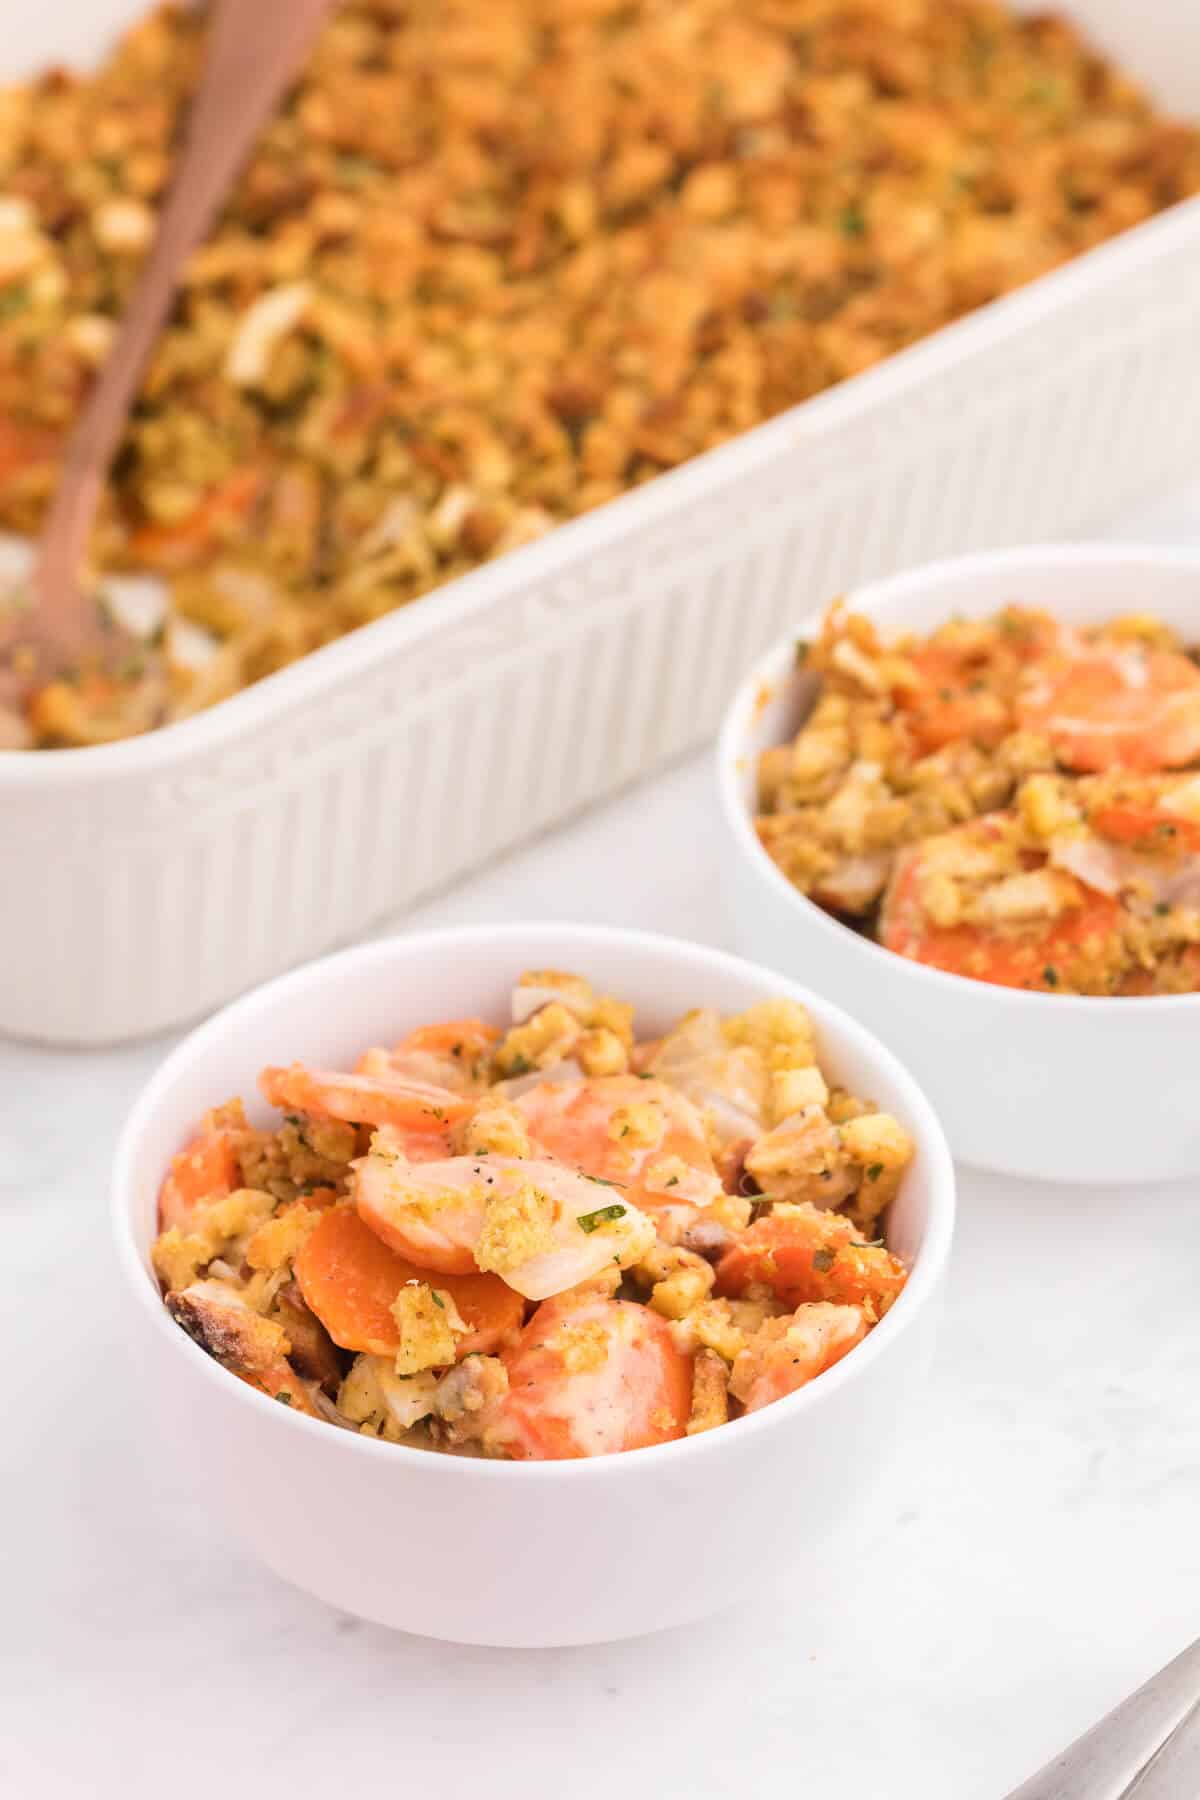 Carrot Casserole - This comforting vegetable side dish recipe is creamy, cheesy with a buttery stuffing topping. Baked to perfection, it's also kid-friendly and a delicious way to get your kids to eat more veggies.